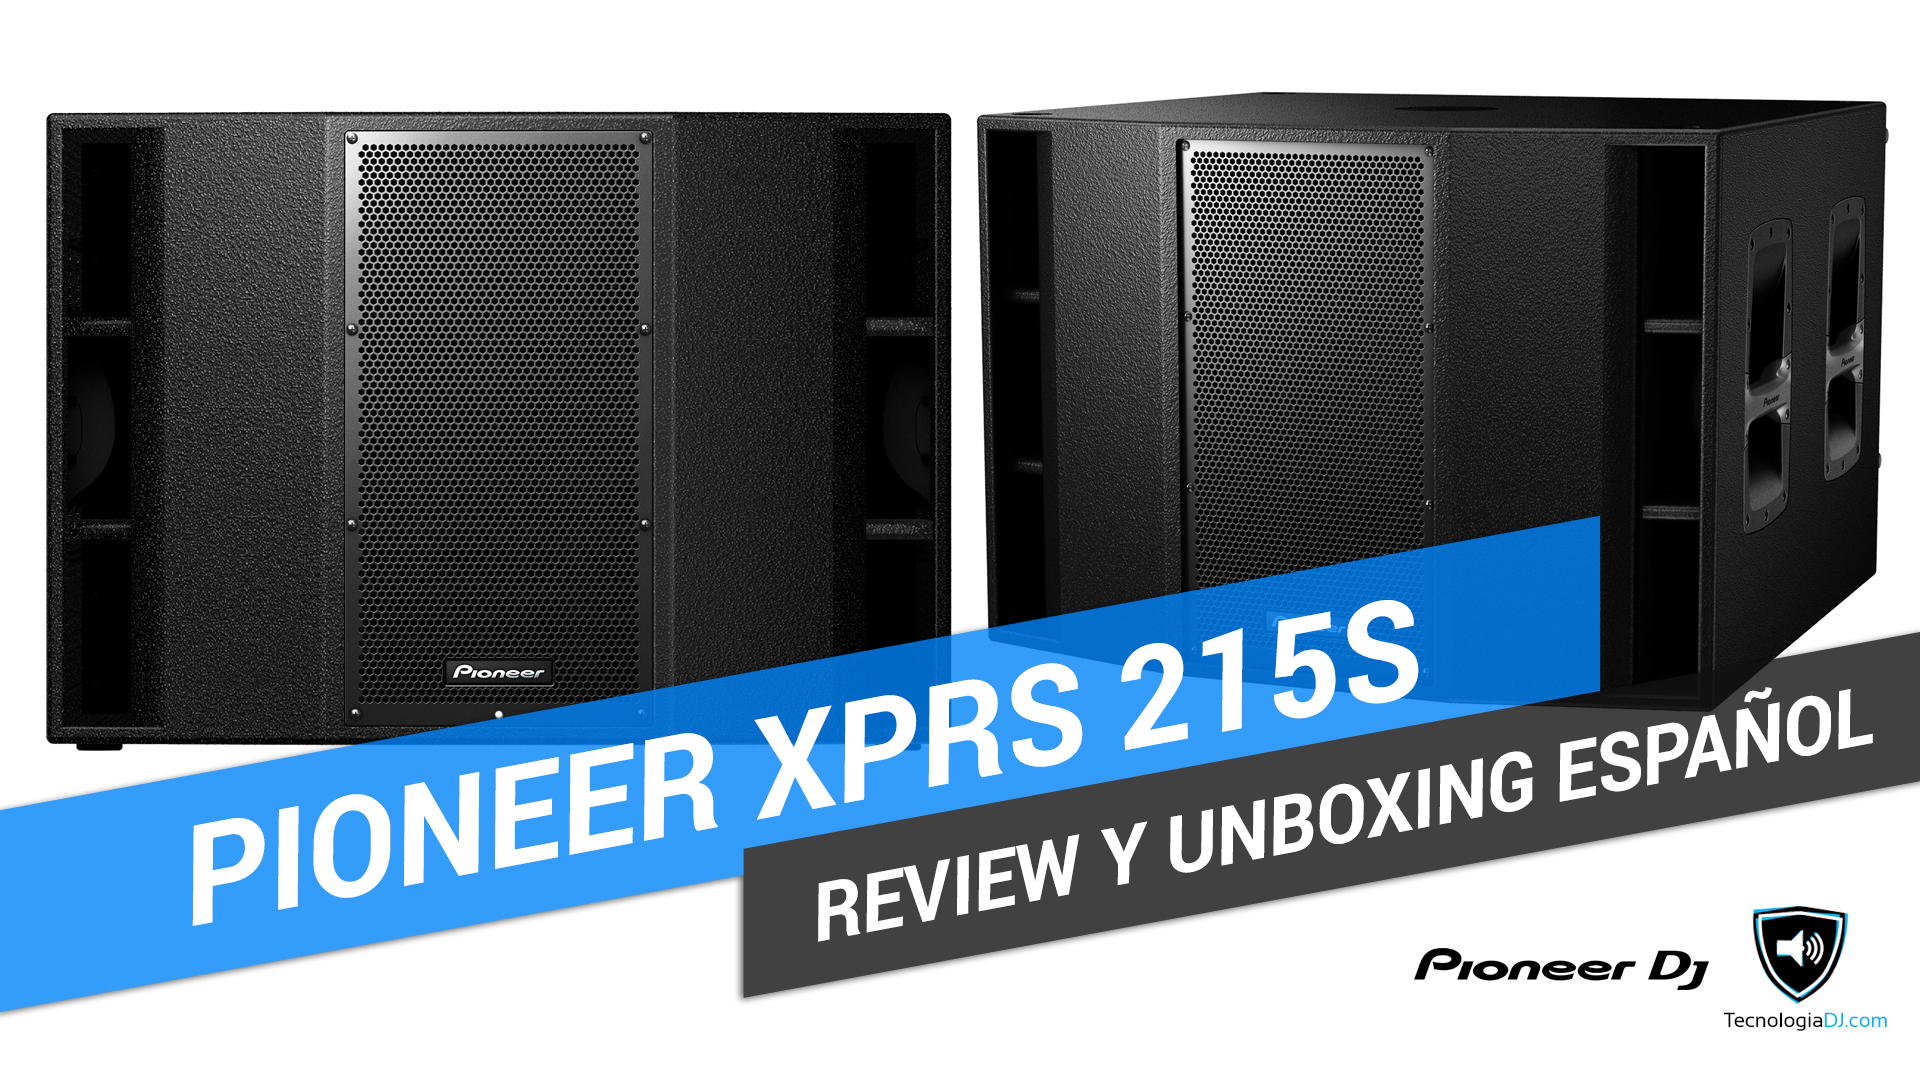 Review y unboxing subgrave Pioneer XPRS 215S